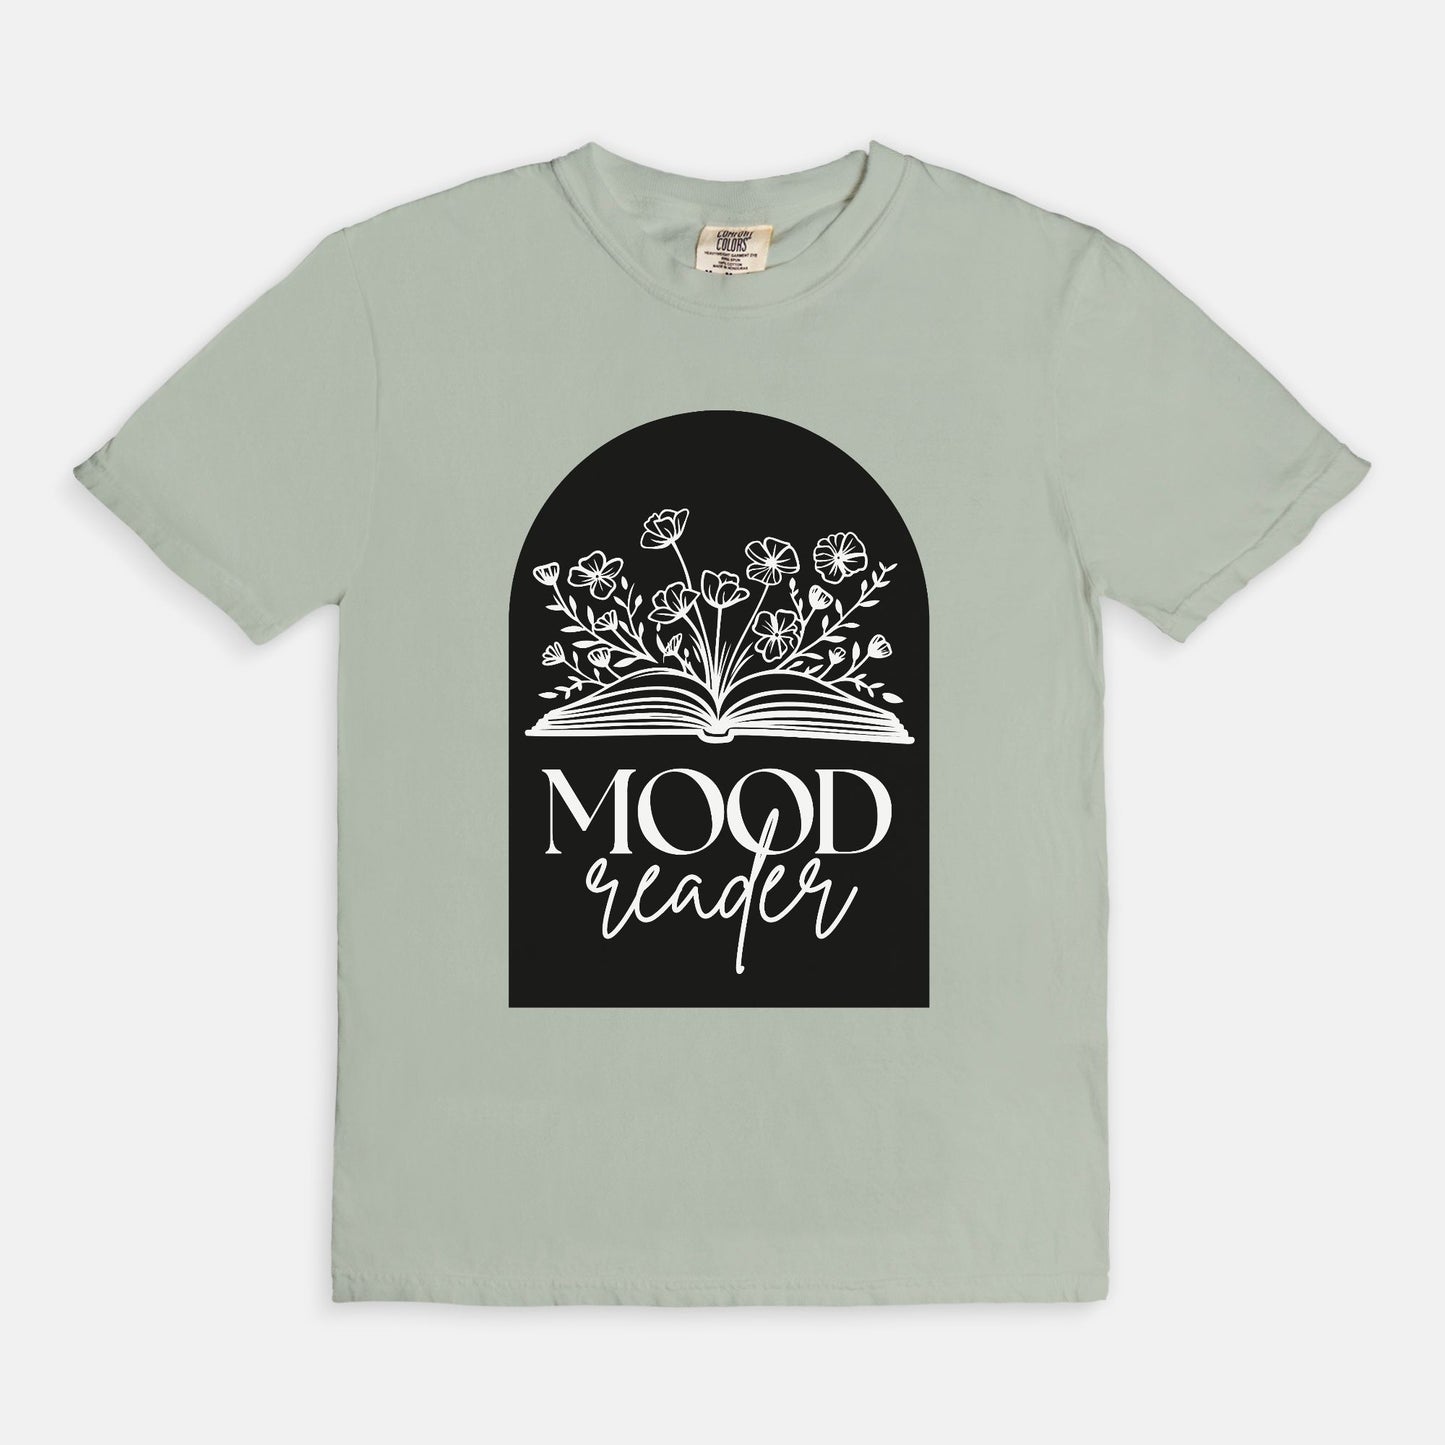 Mood Reader Tee Black and White